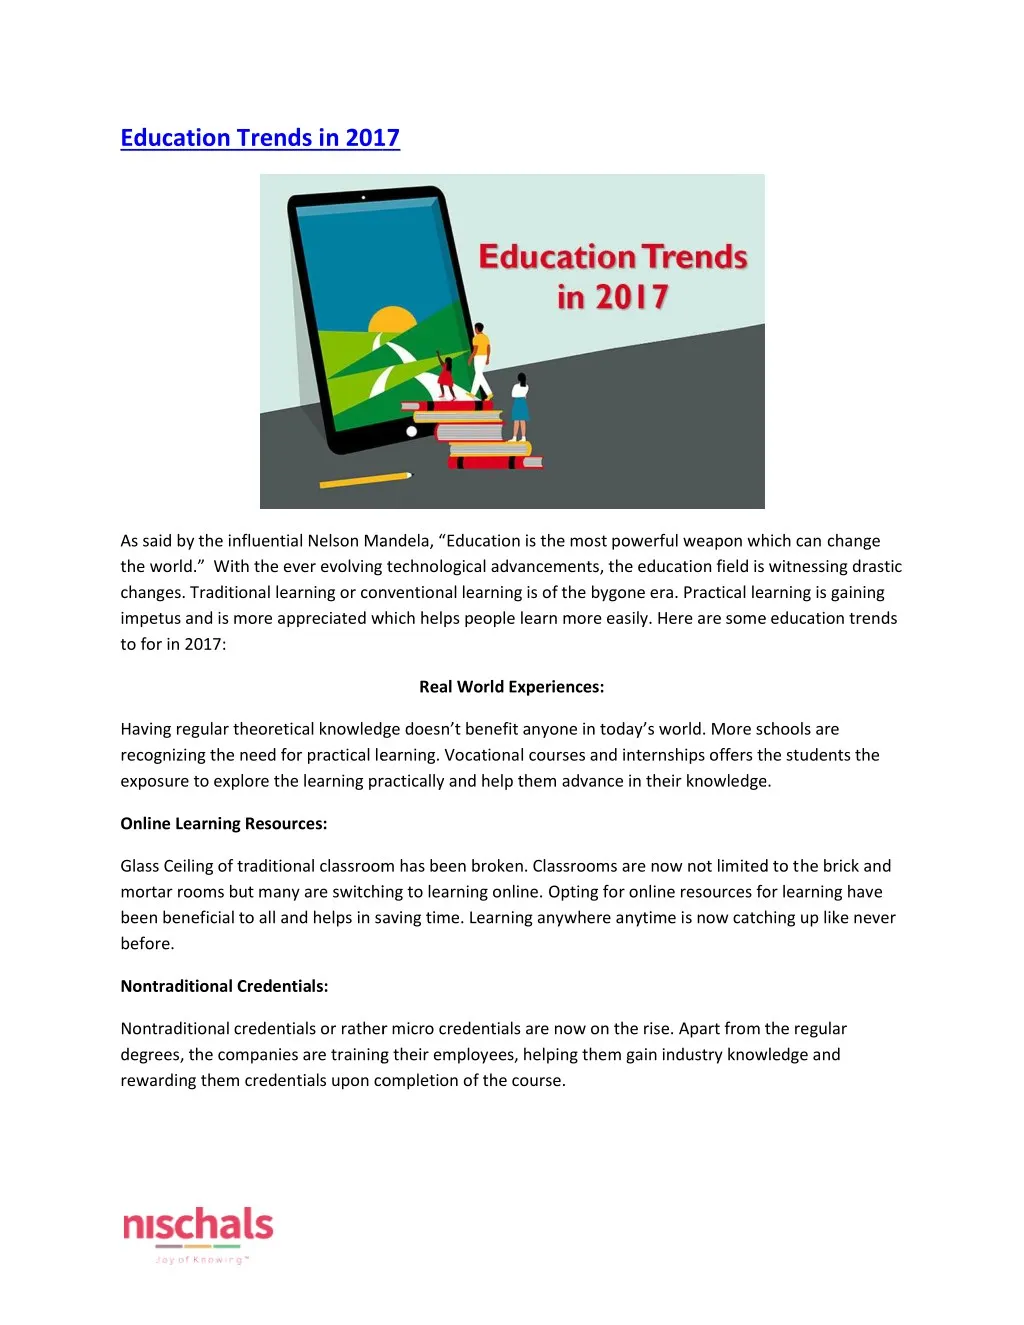 education trends in 2017 education trends in 2017